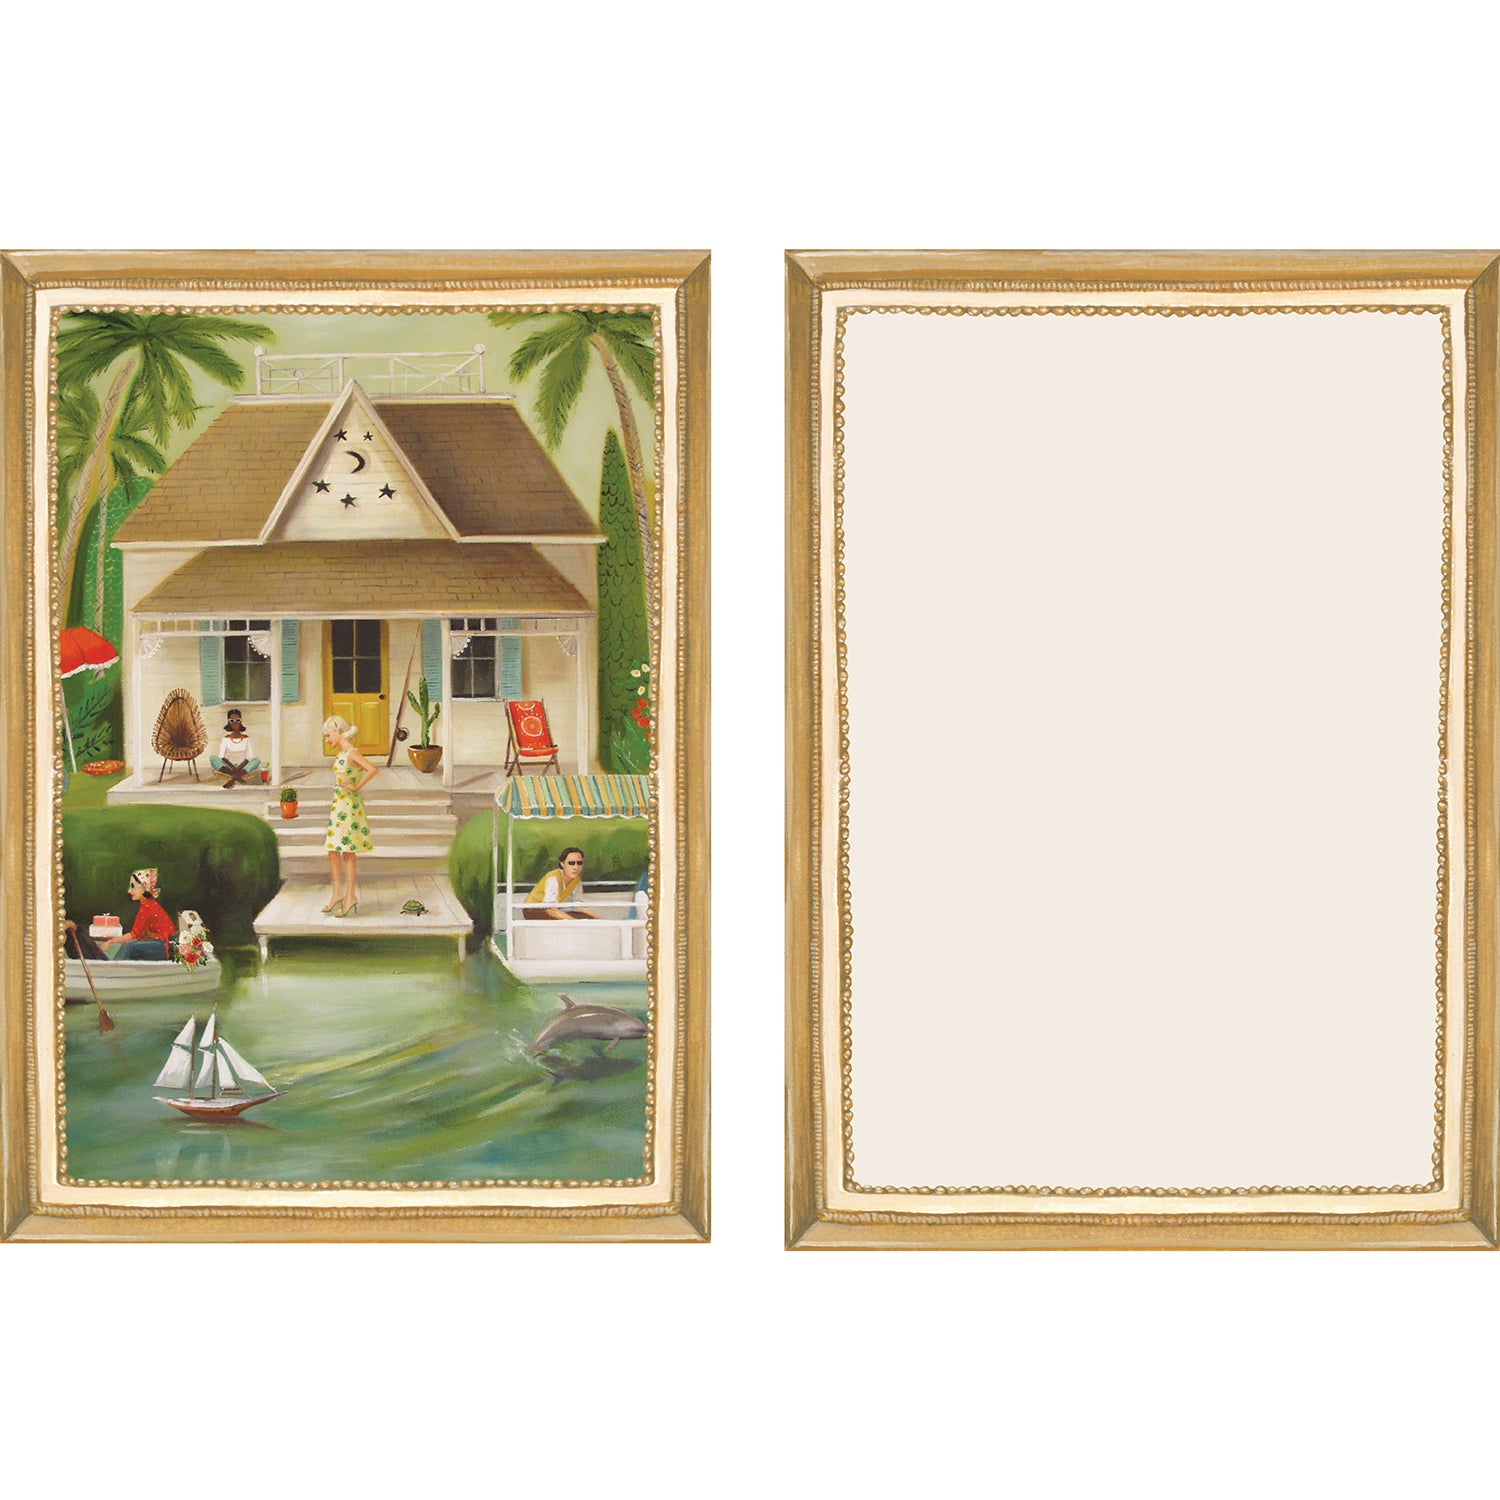 The illustrated front and blank back of a Flat Note, both sides framed in gold, featuring a painterly illustration of a river-side house with folks enjoying the dock and boats.